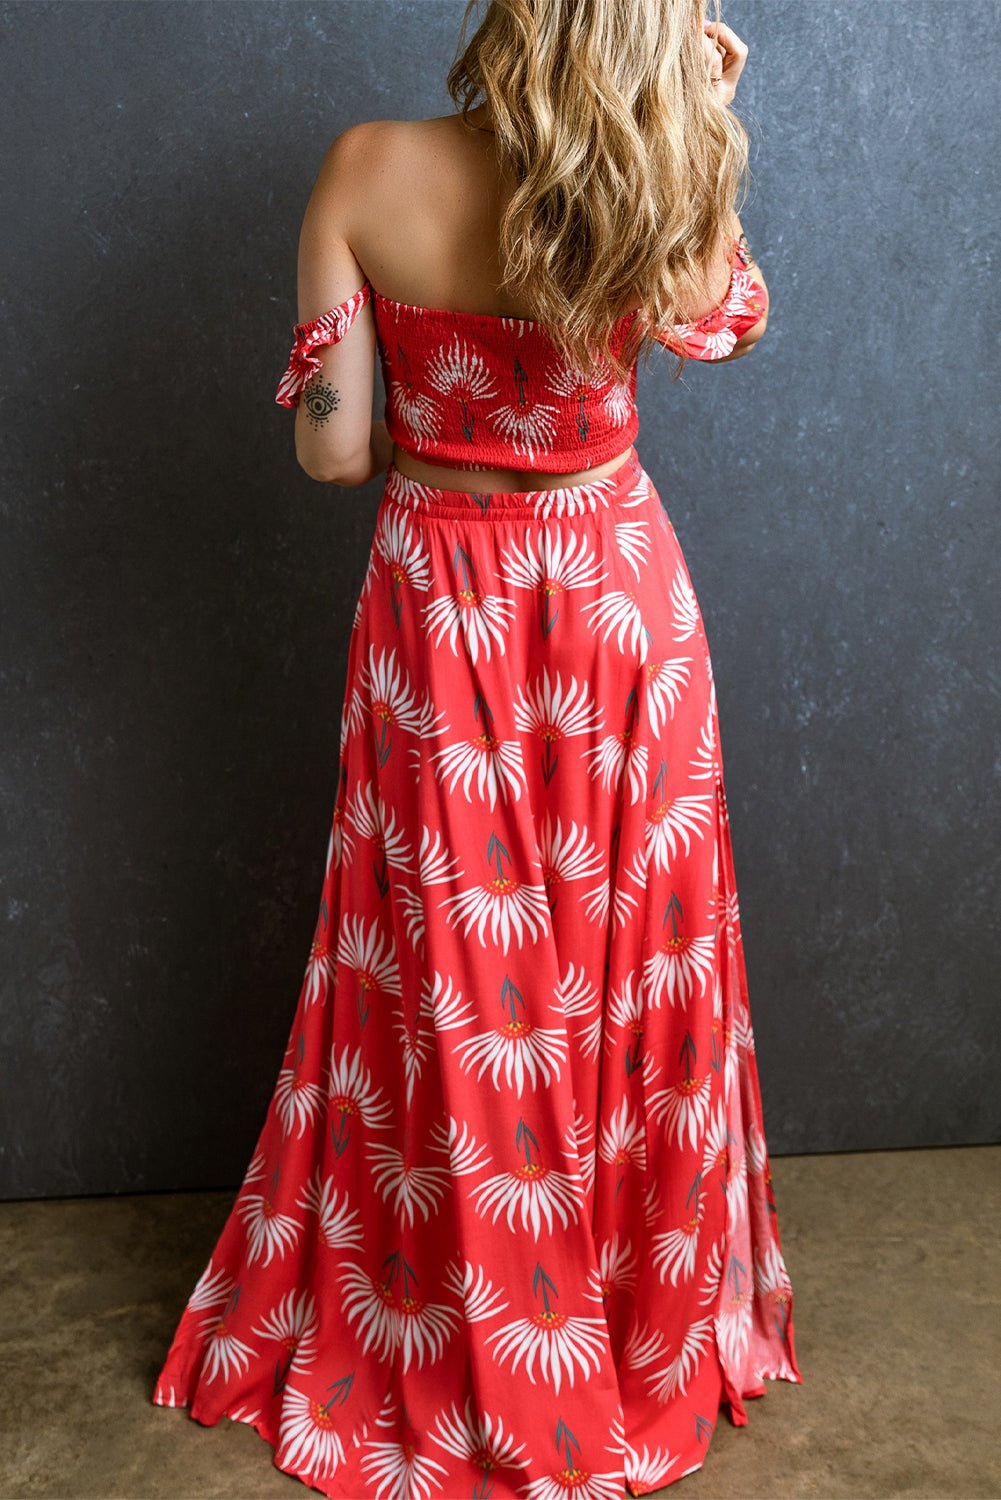 The image is showcasing a Bohemian Floral Shirred Off Shoulder Crop Top and Slit Maxi Skirt Set at Mommy & Lino's Closet